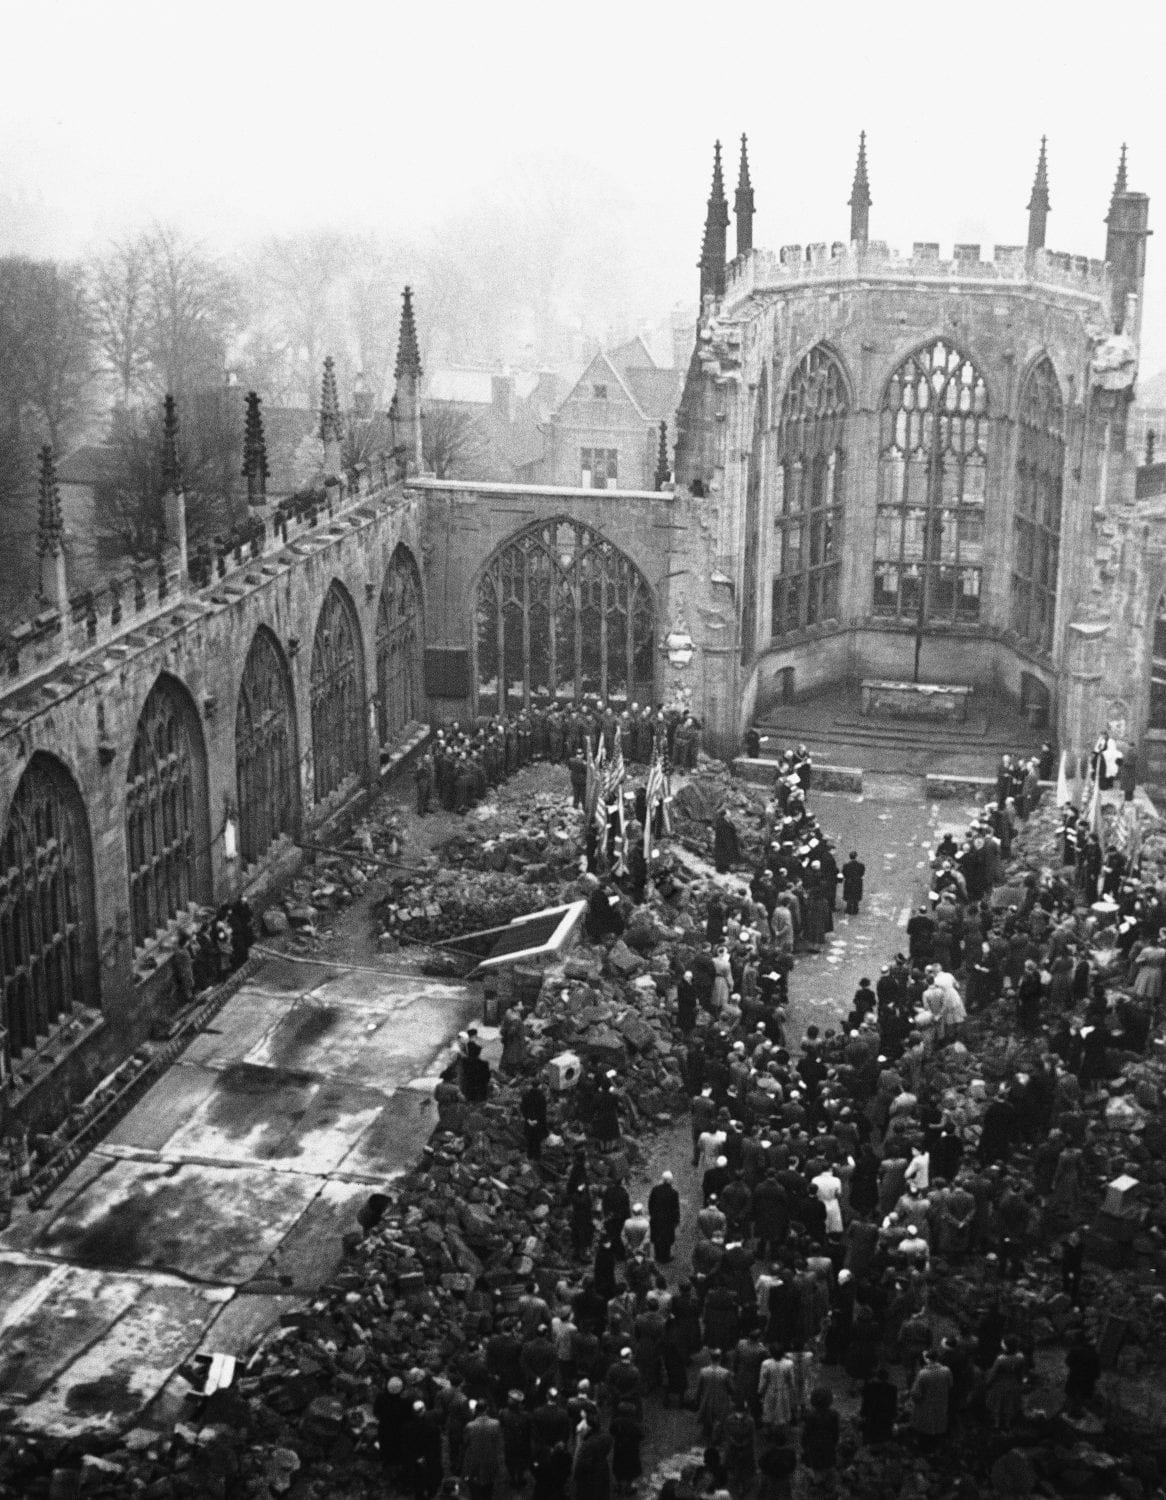 Many notable personalities, including Dr. Edvard Benes, president of Czechoslovakia, unseen, attended a Lidice Commemoration Service in Coventry Cathedral in Coventry, England on March 12, 1944. (AP Photo)